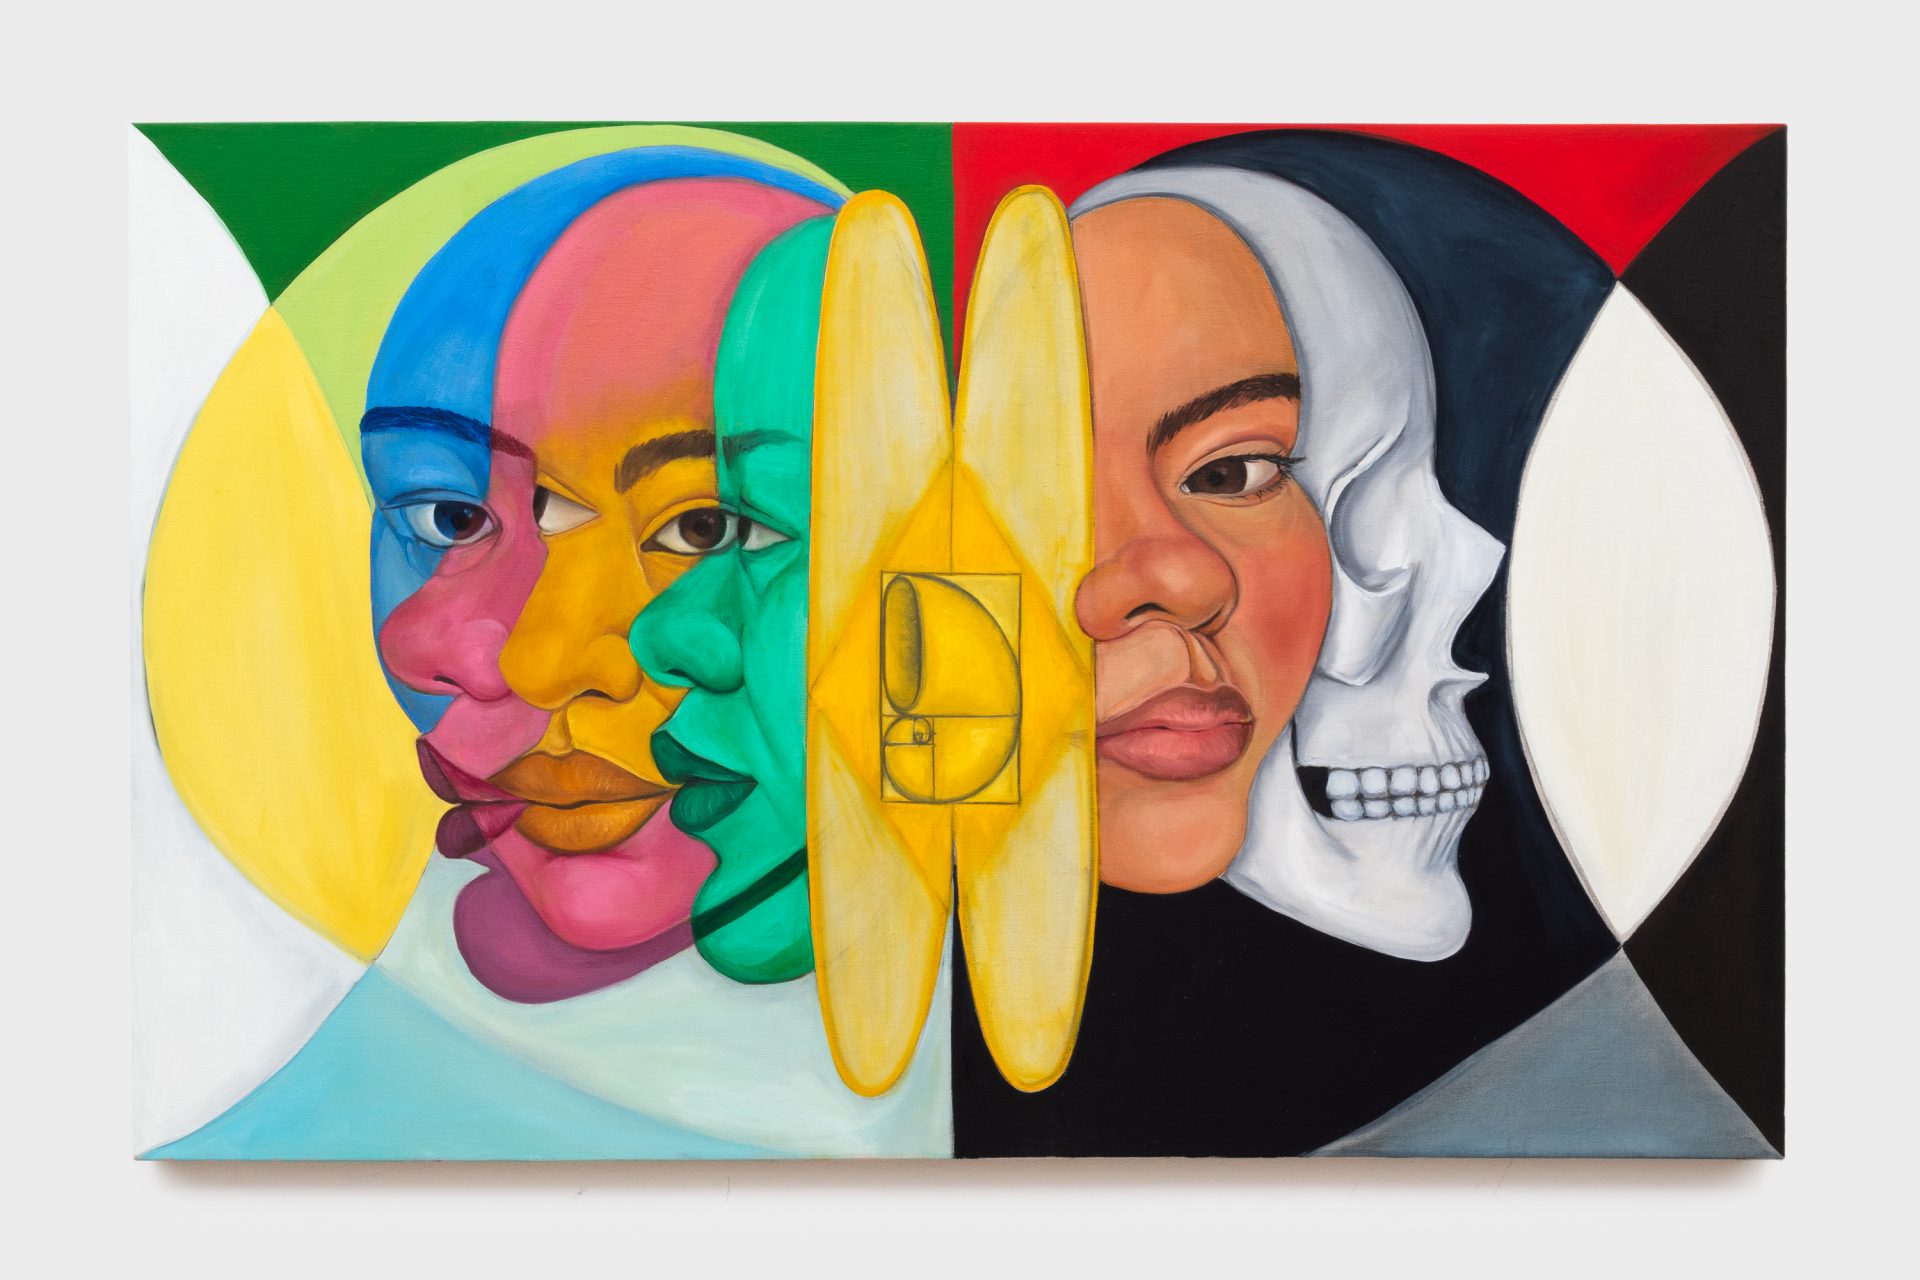 Two Rising Artists Offer Unique Visions of the Dominican Diasporic Experience In a New Detroit Exhibition